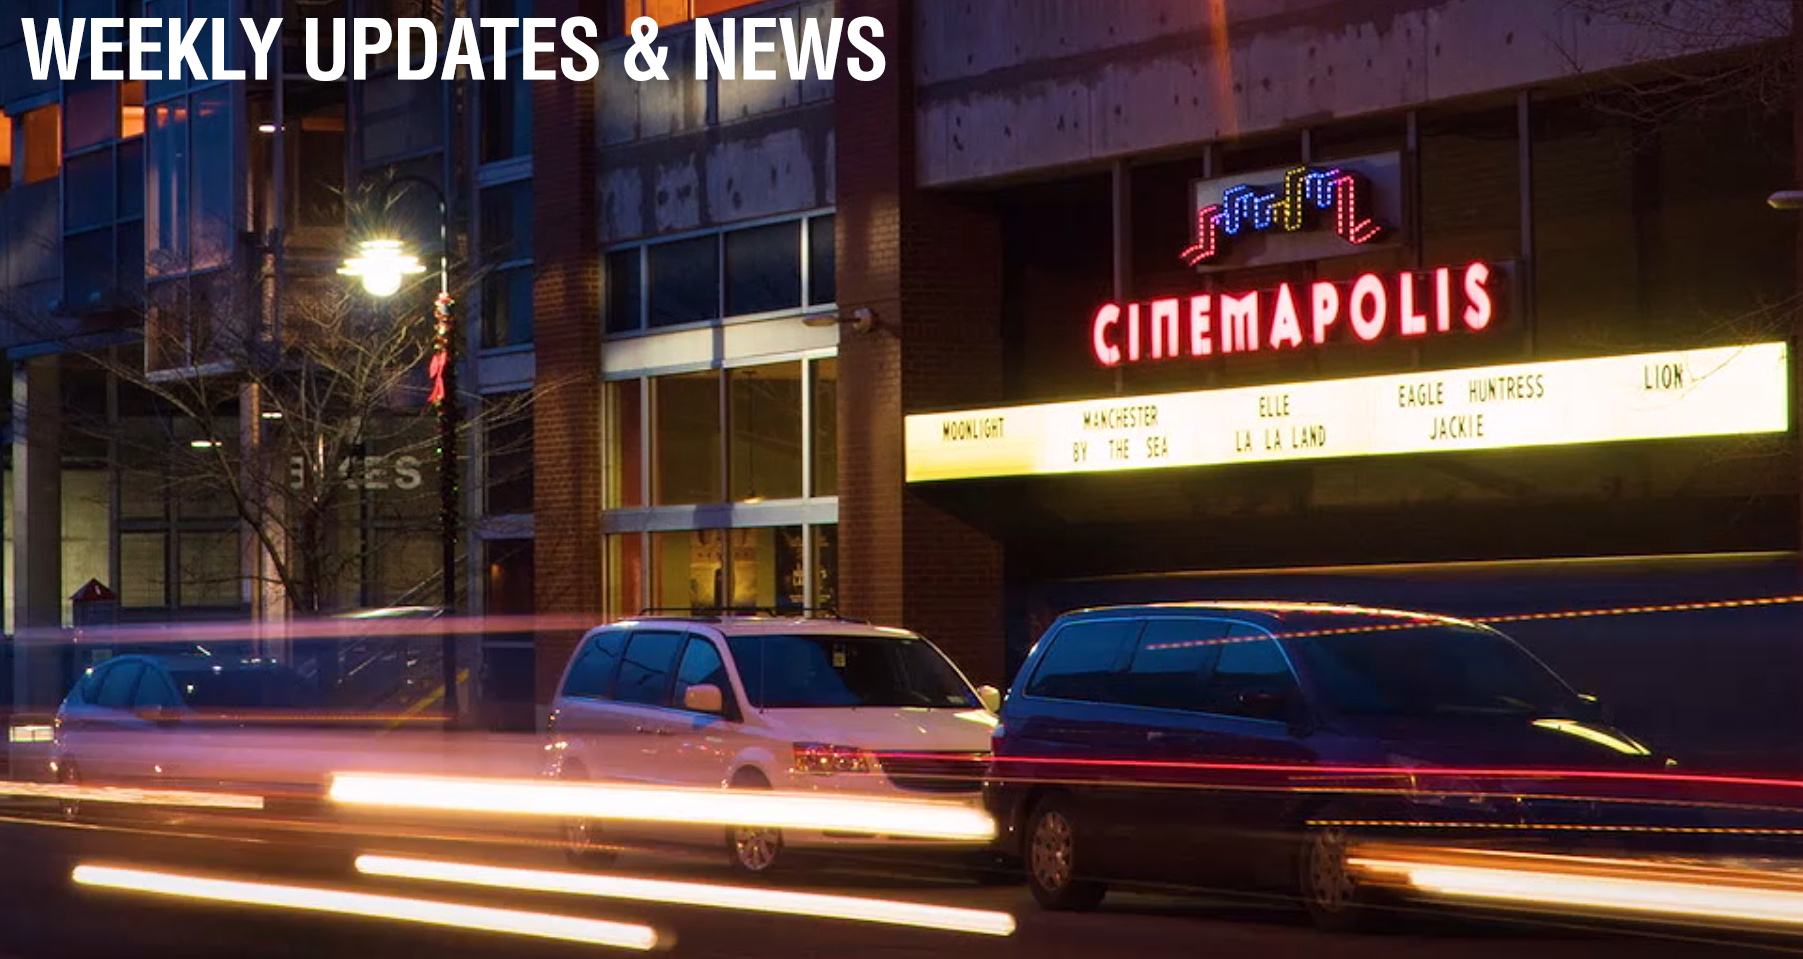 Cinemapolis - Ithaca's Member Supported Independent Movie Theater